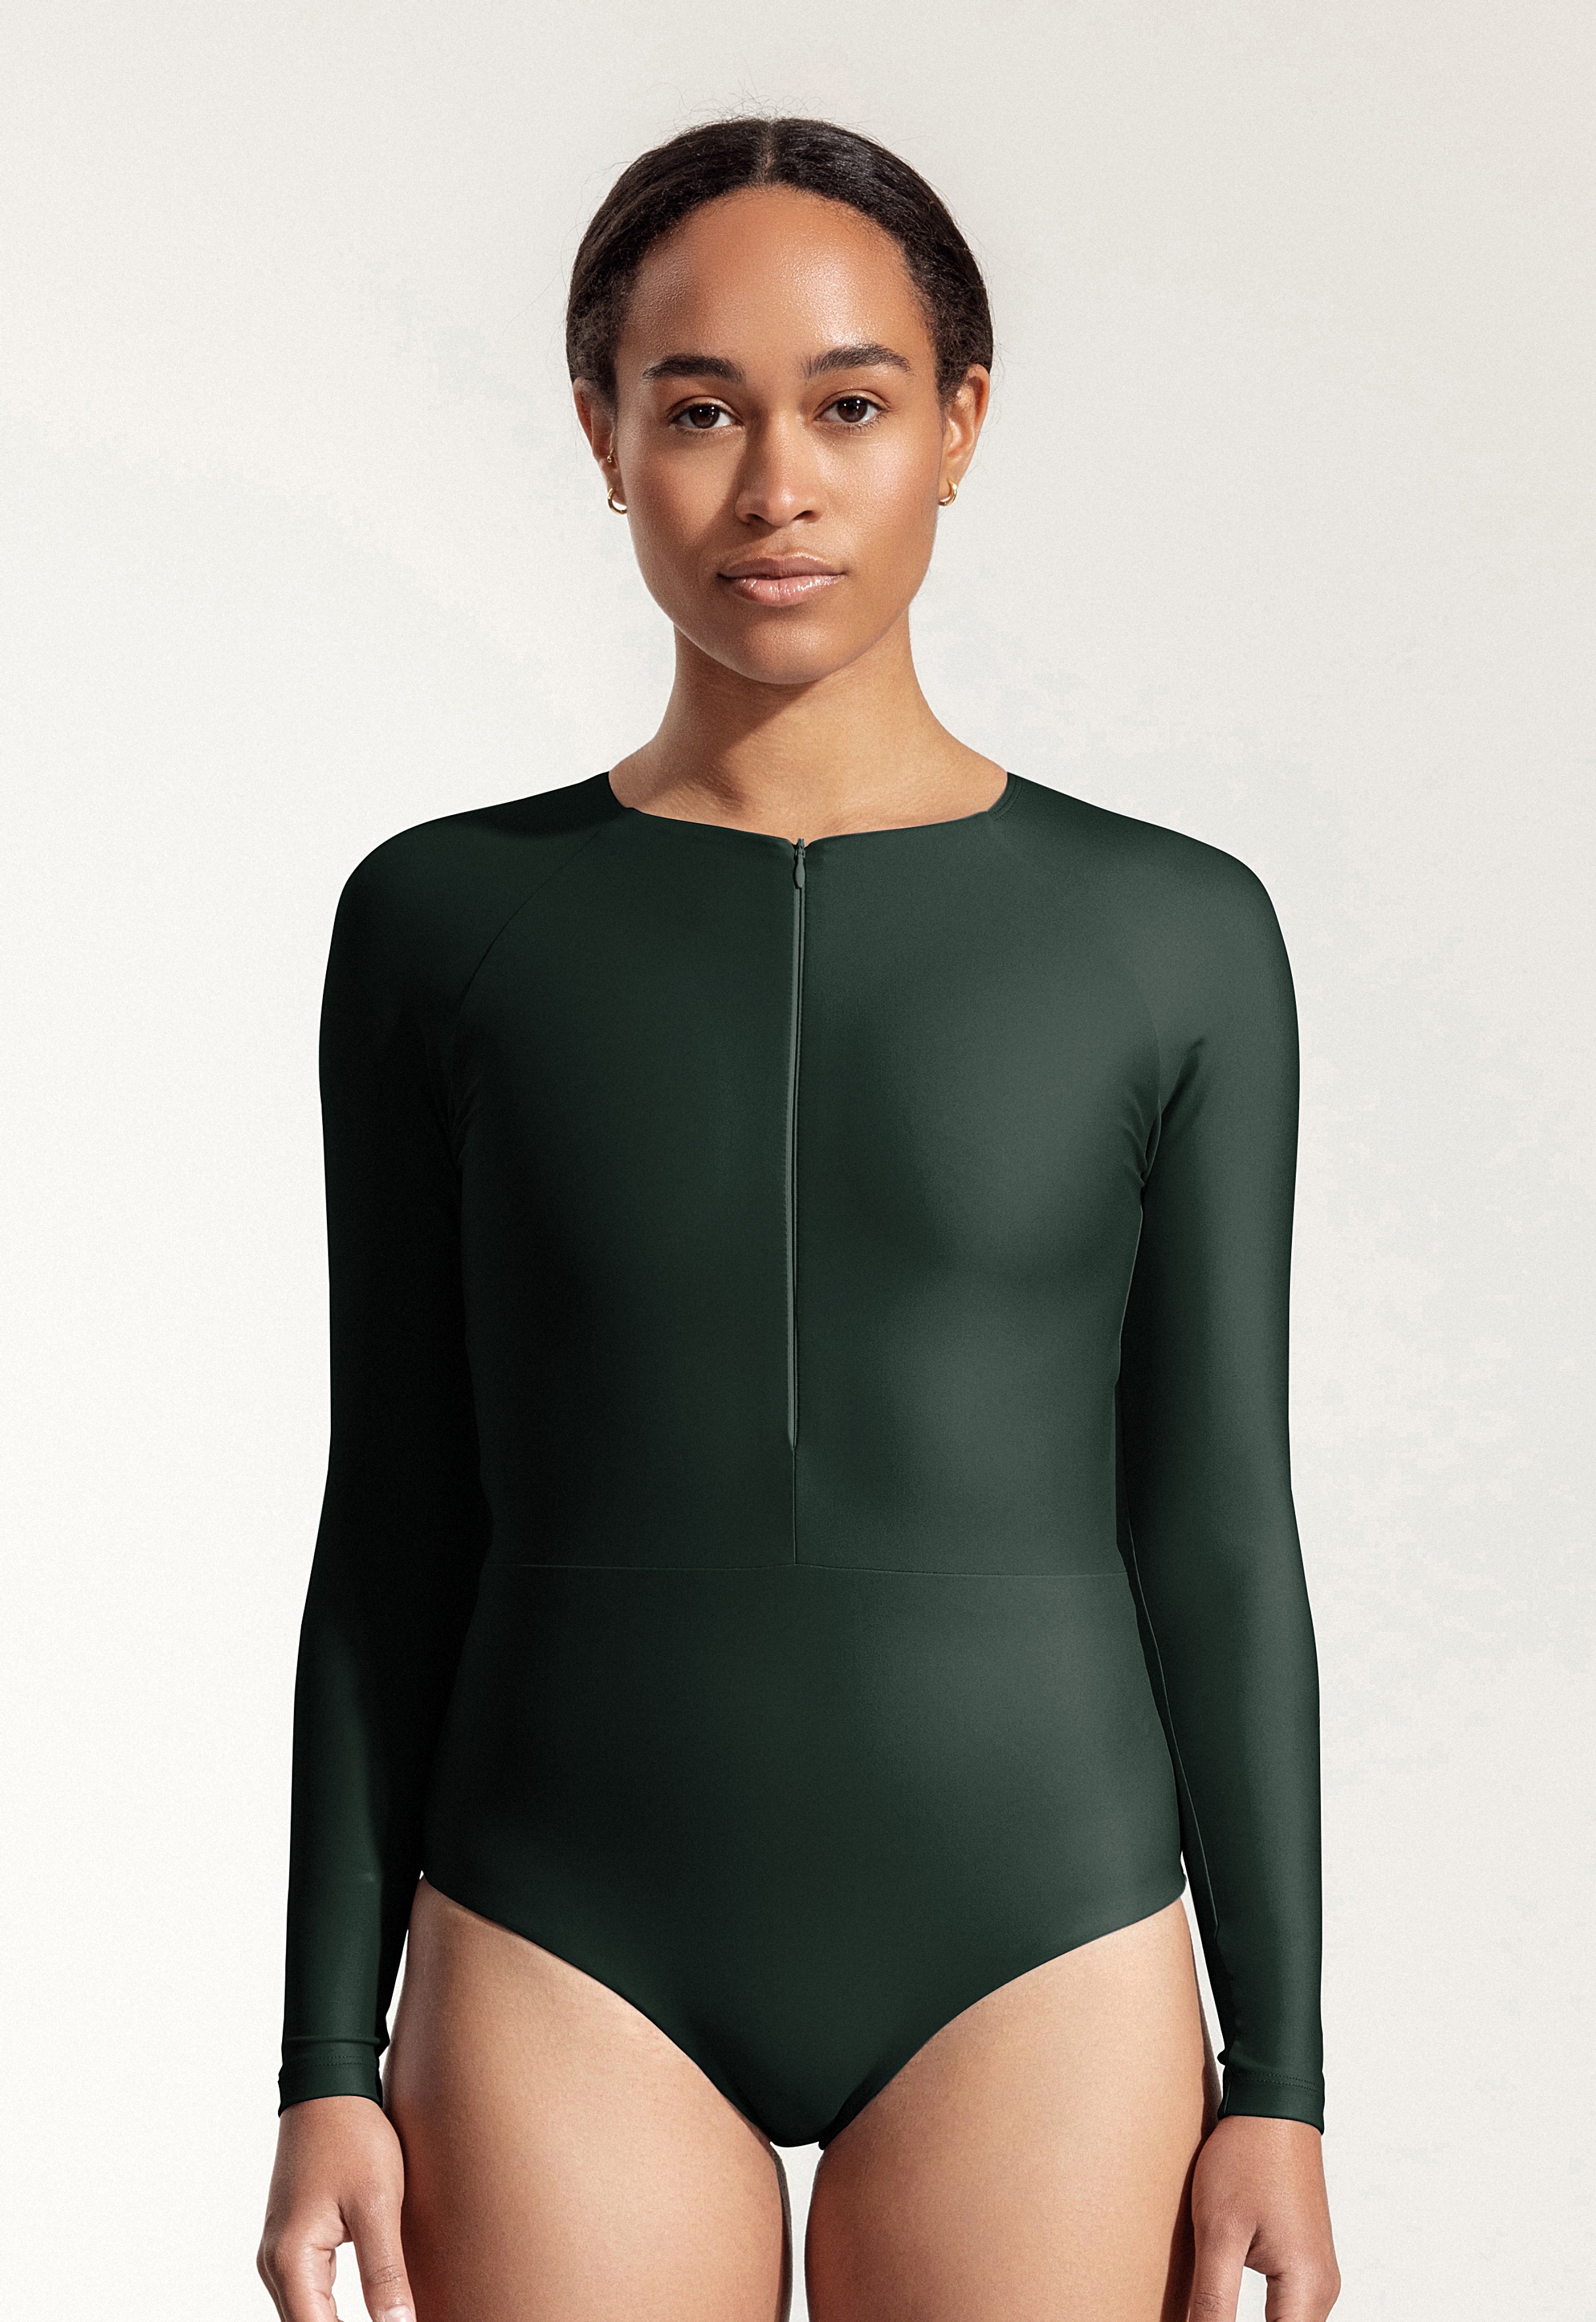 Surf Swimsuit "Orfe" in night green